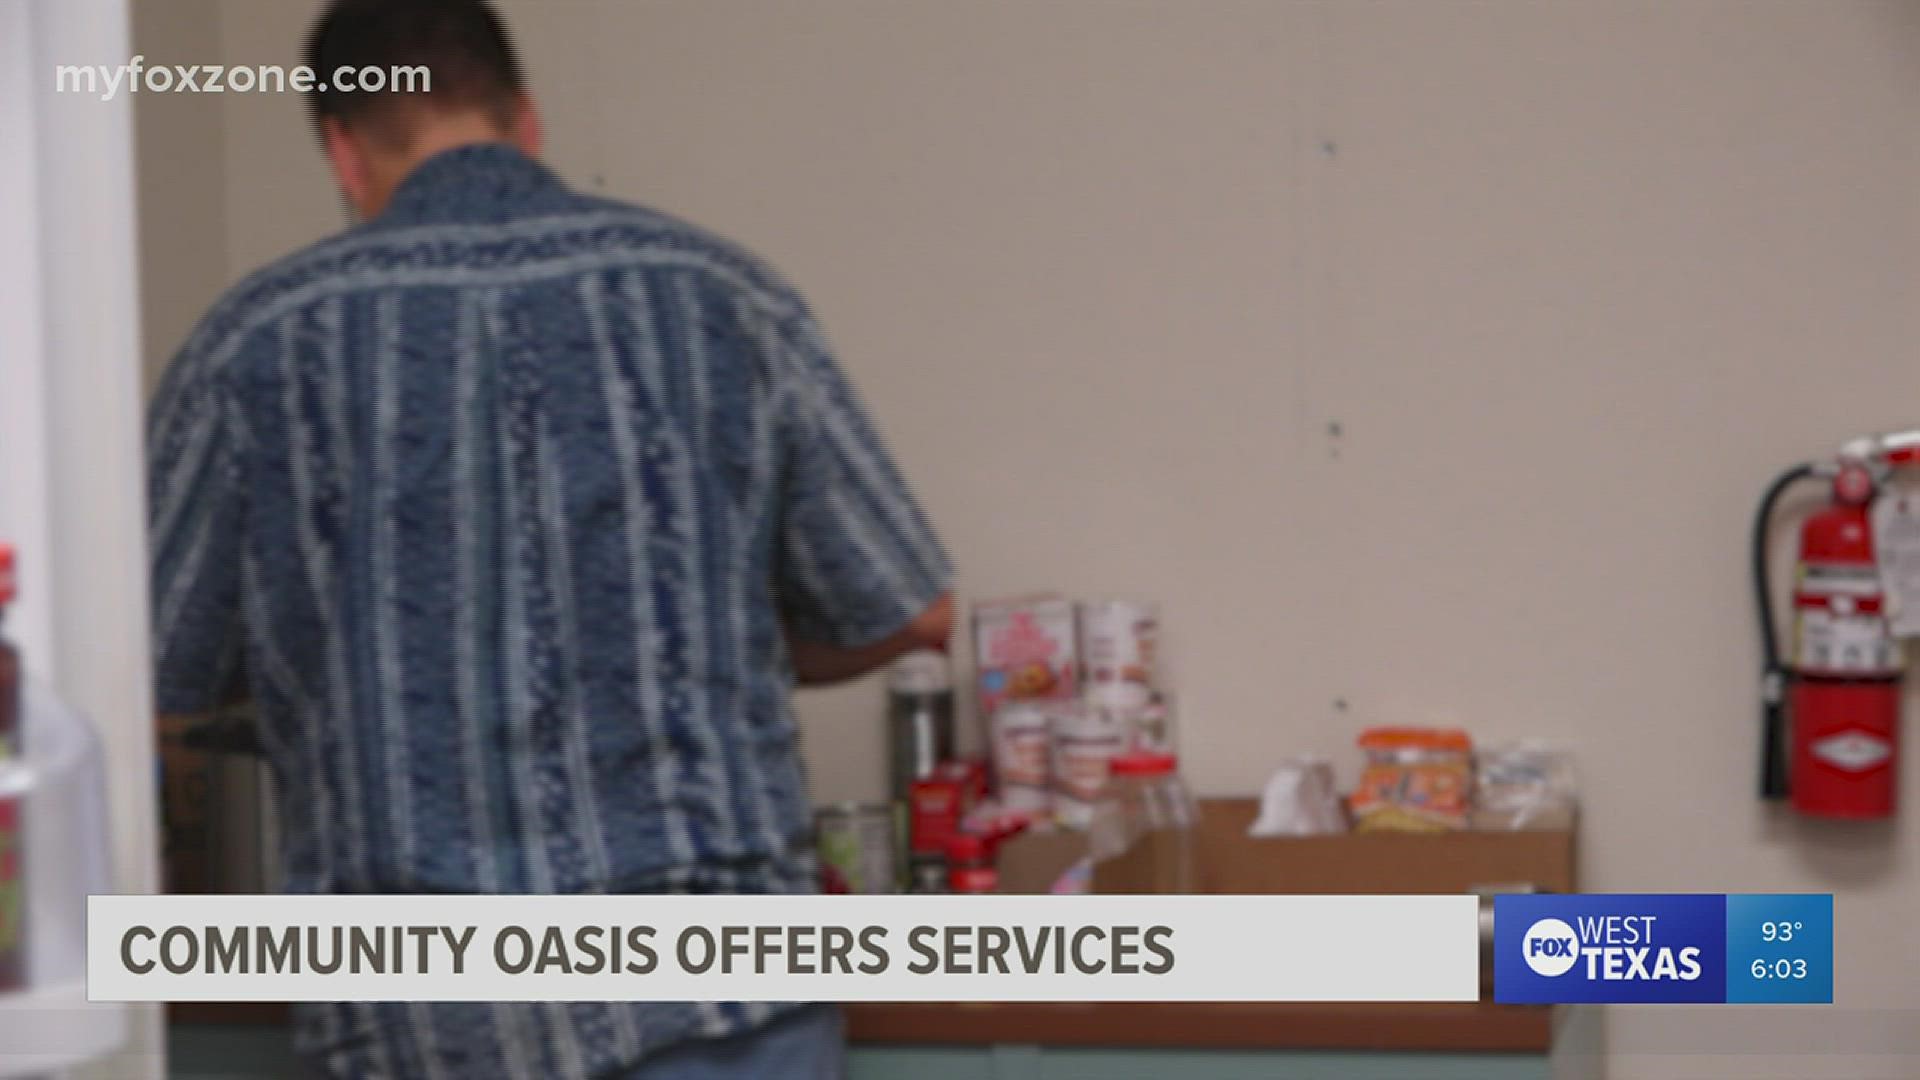 St. Paul Presbyterian Church of San Angelo opened its Community Oasis center, a place where people can stop by, grab a bite or receive assistance.